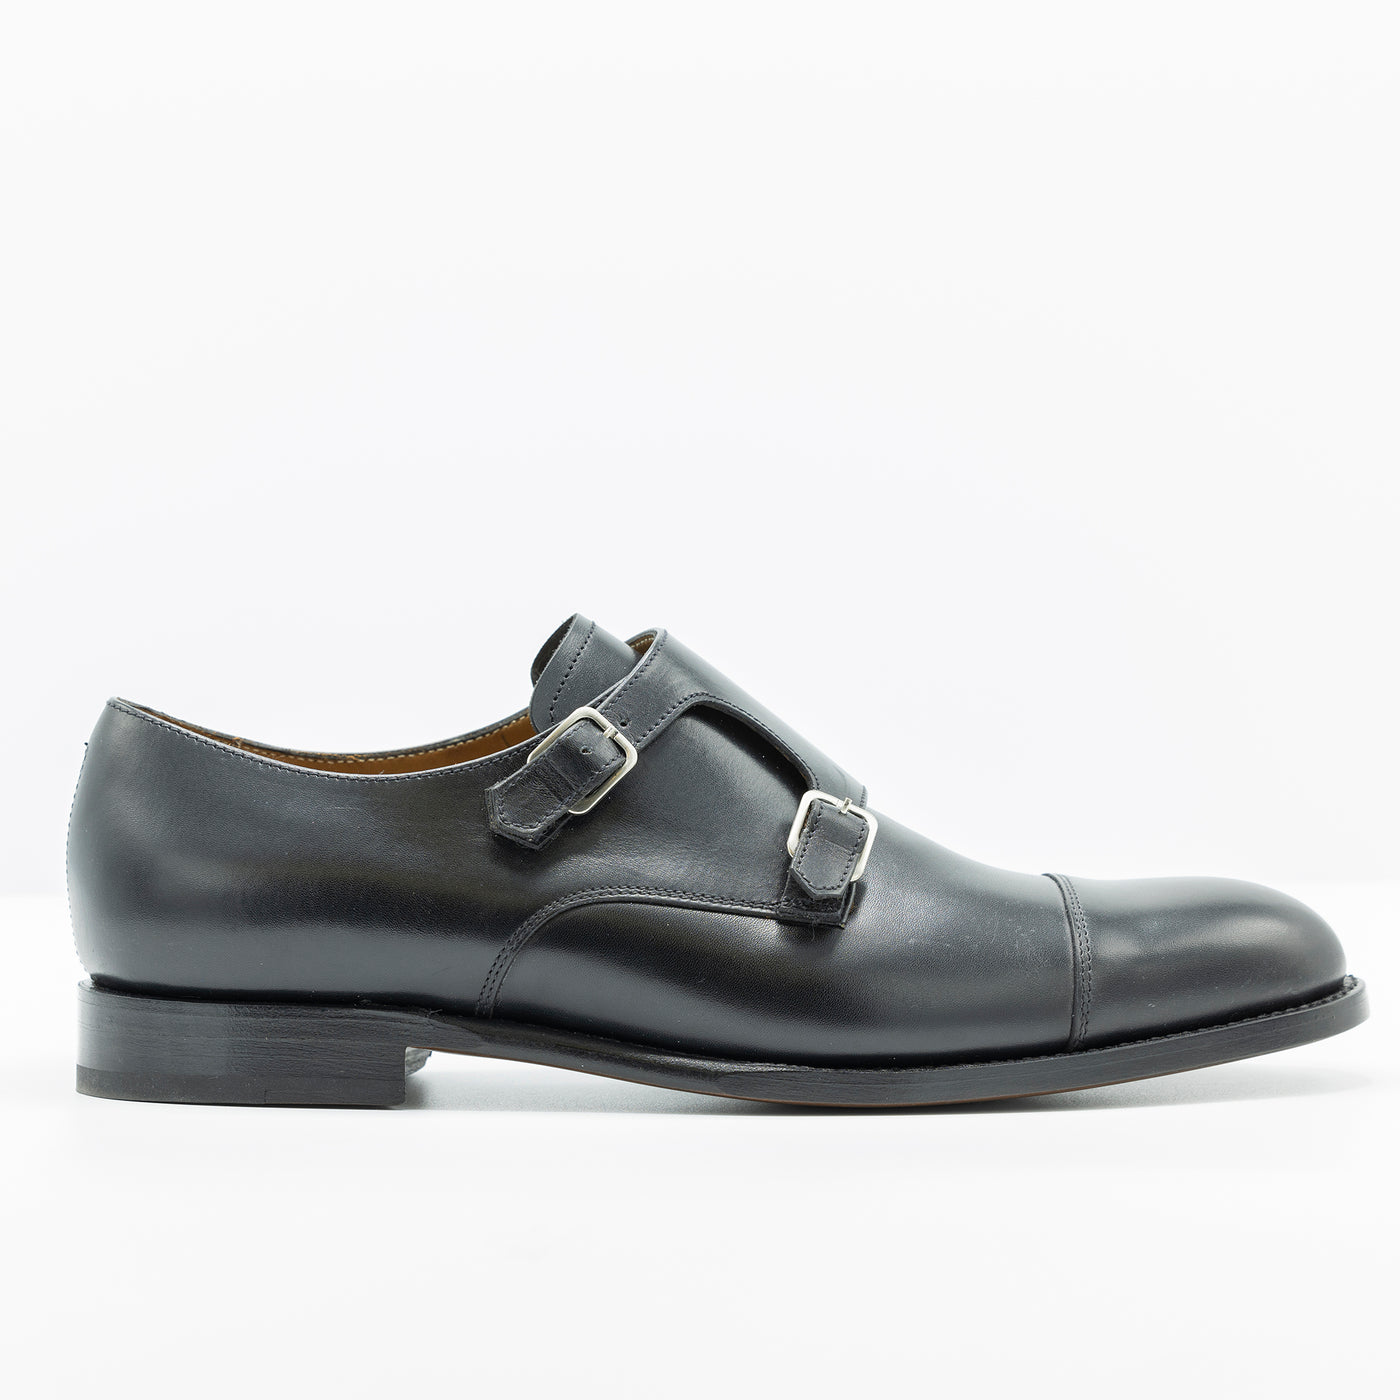 Black leather double monk strap. good year welt leather soles cap toe.